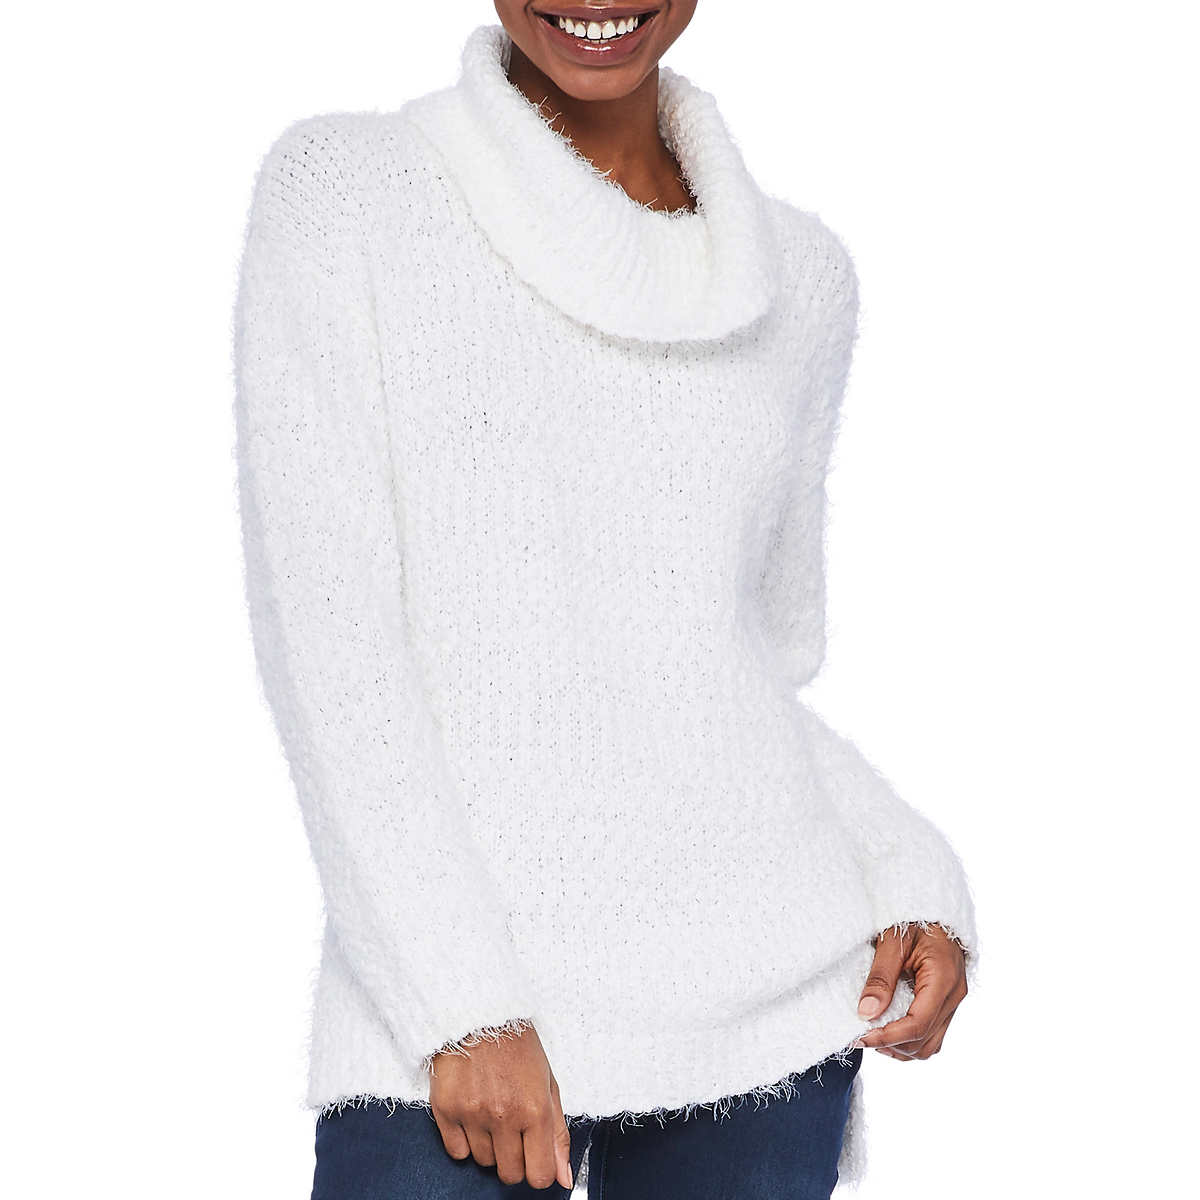 Kenneth Cole Women's Cowl Neck Tunic Sweater